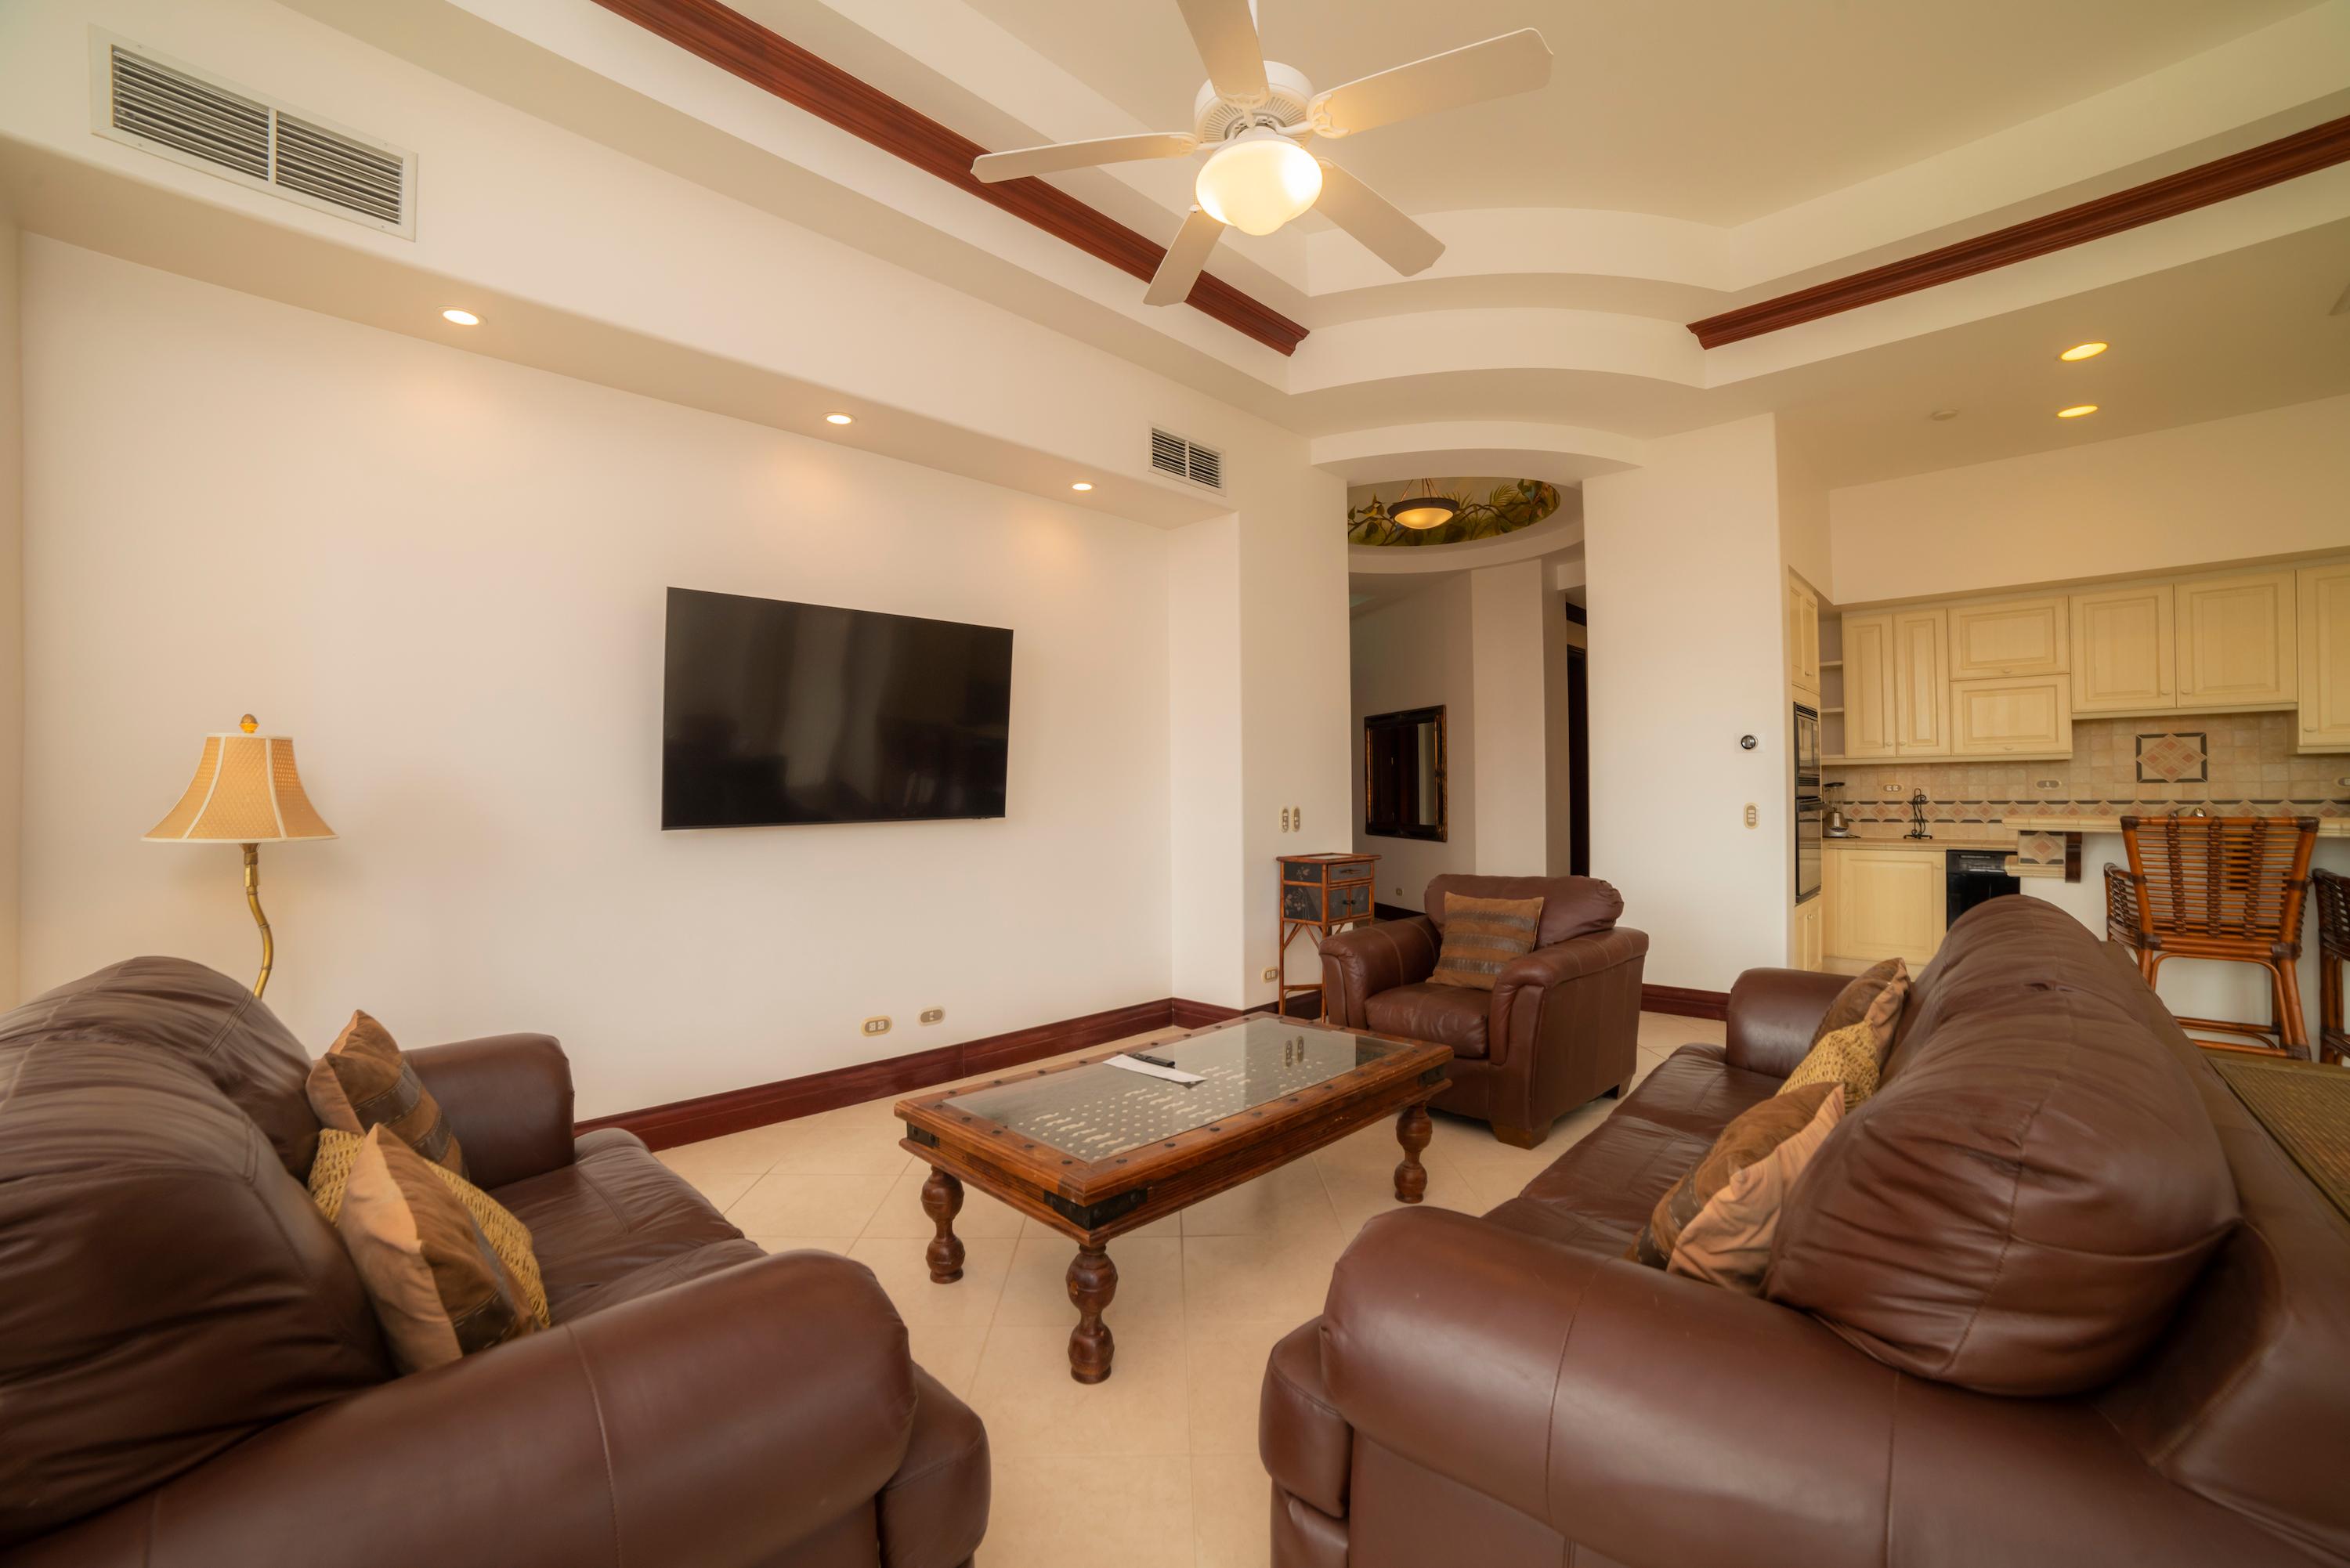 Apartment with Tropical Wood furniture in Private Condo Safe and Secure